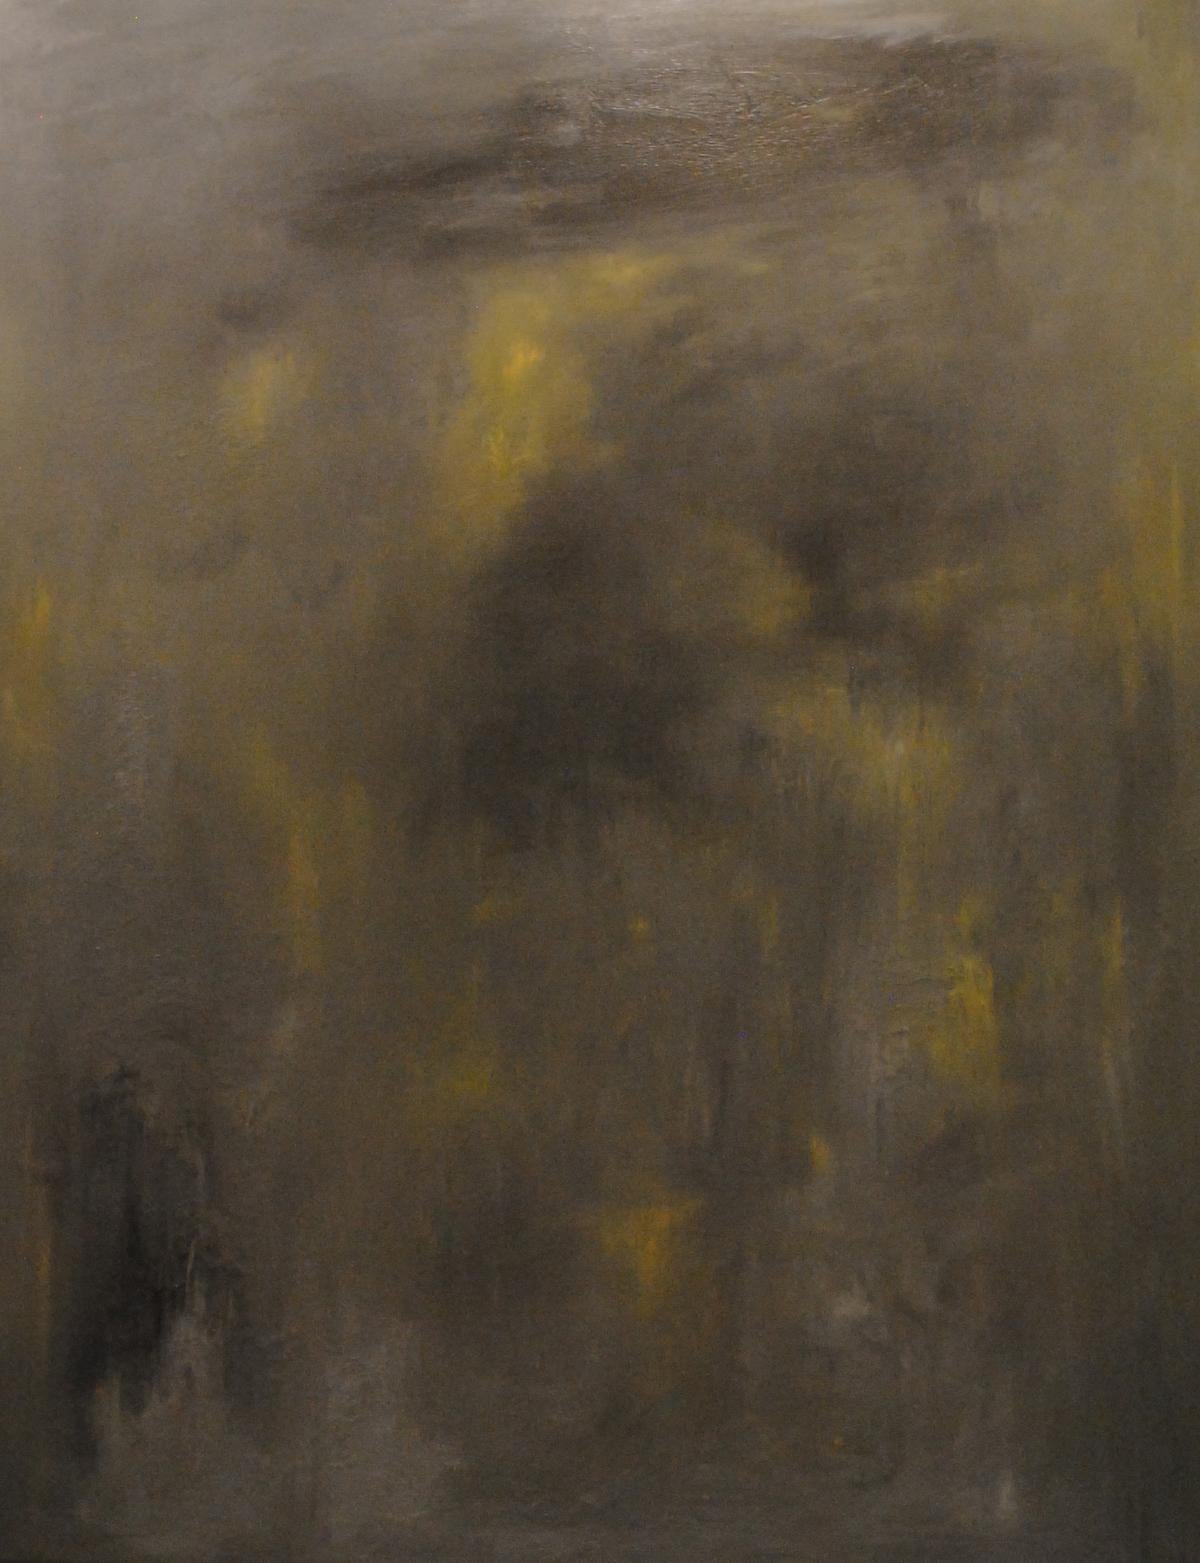 Md Tokon - Sound of Silence, Painting 2015